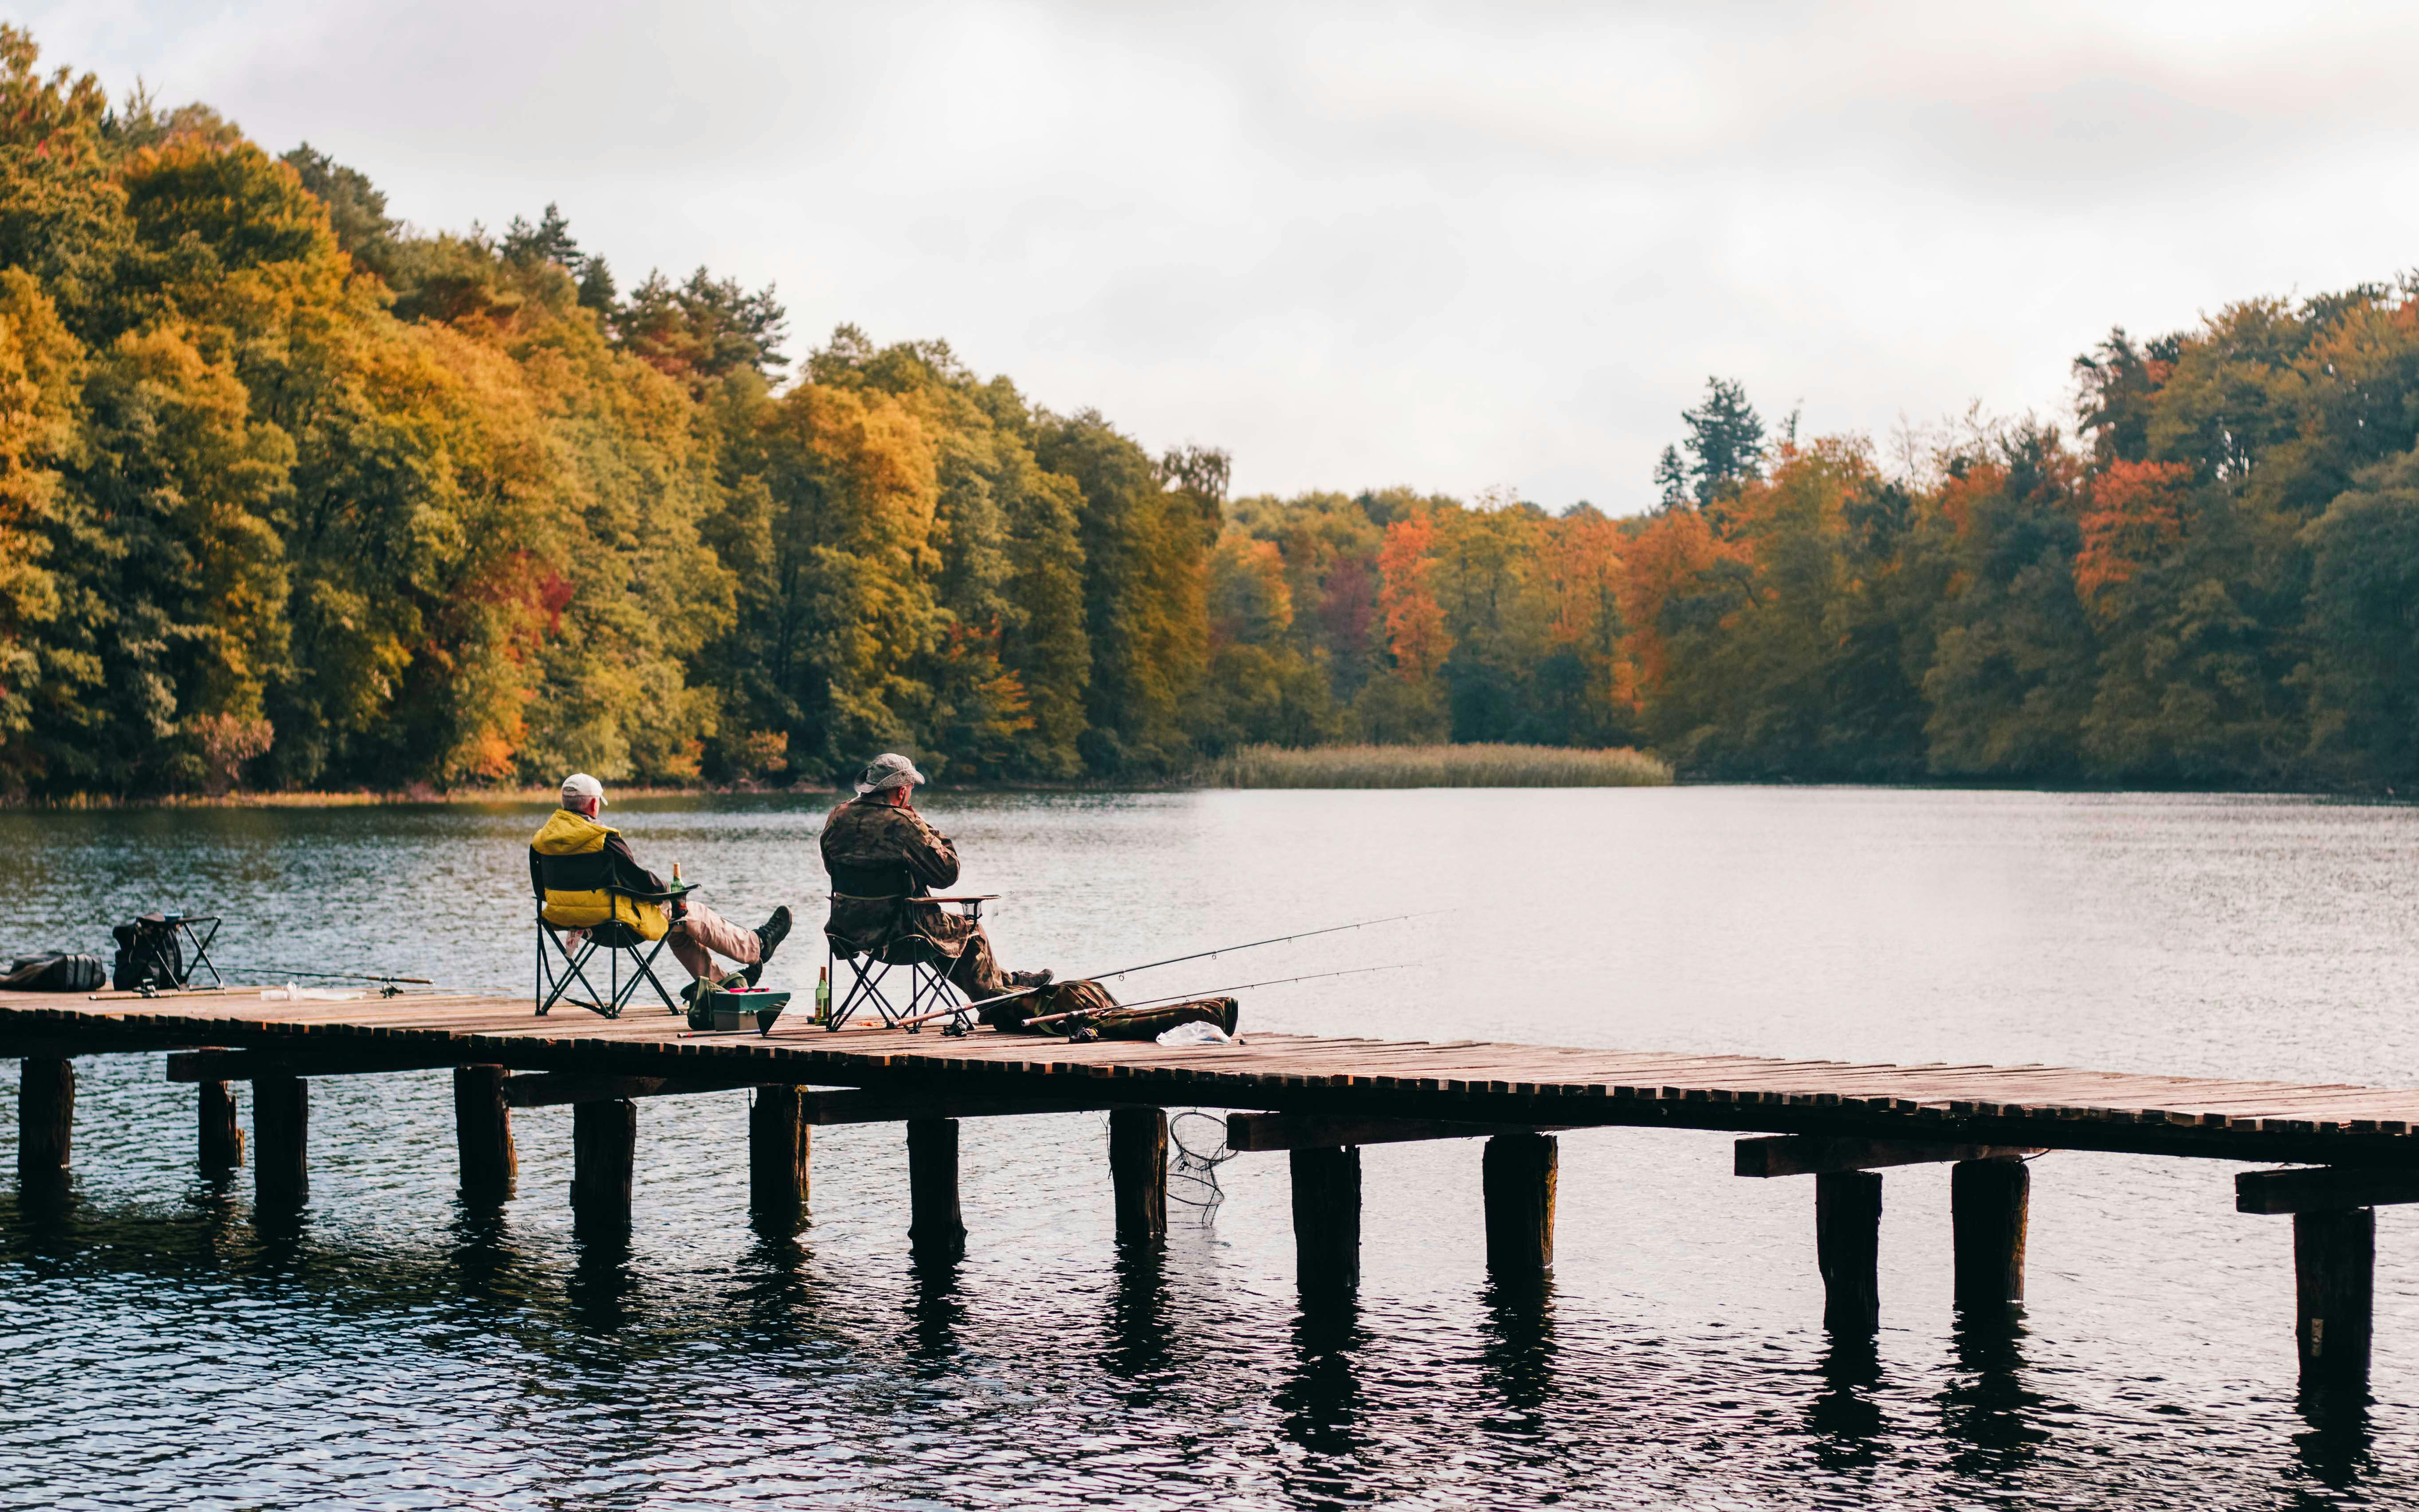 Male Fisherman: Over 86,419 Royalty-Free Licensable Stock Photos